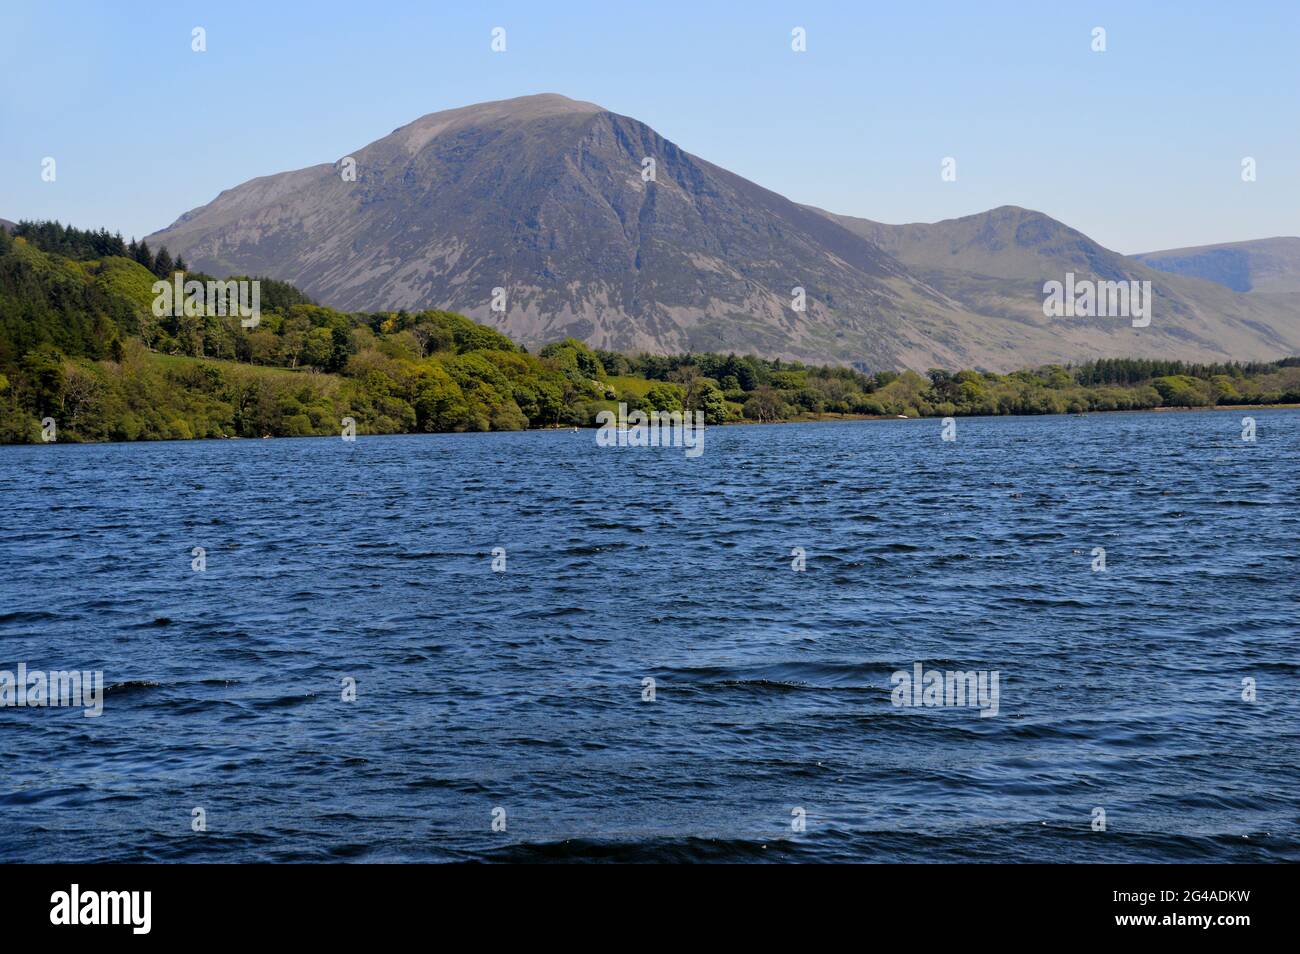 The Wainwrights Grasmoor & Whiteless Pike with Loweswater Lake from Holme Wood dans le parc national Lake District, Cumbria, Angleterre, Royaume-Uni. Banque D'Images